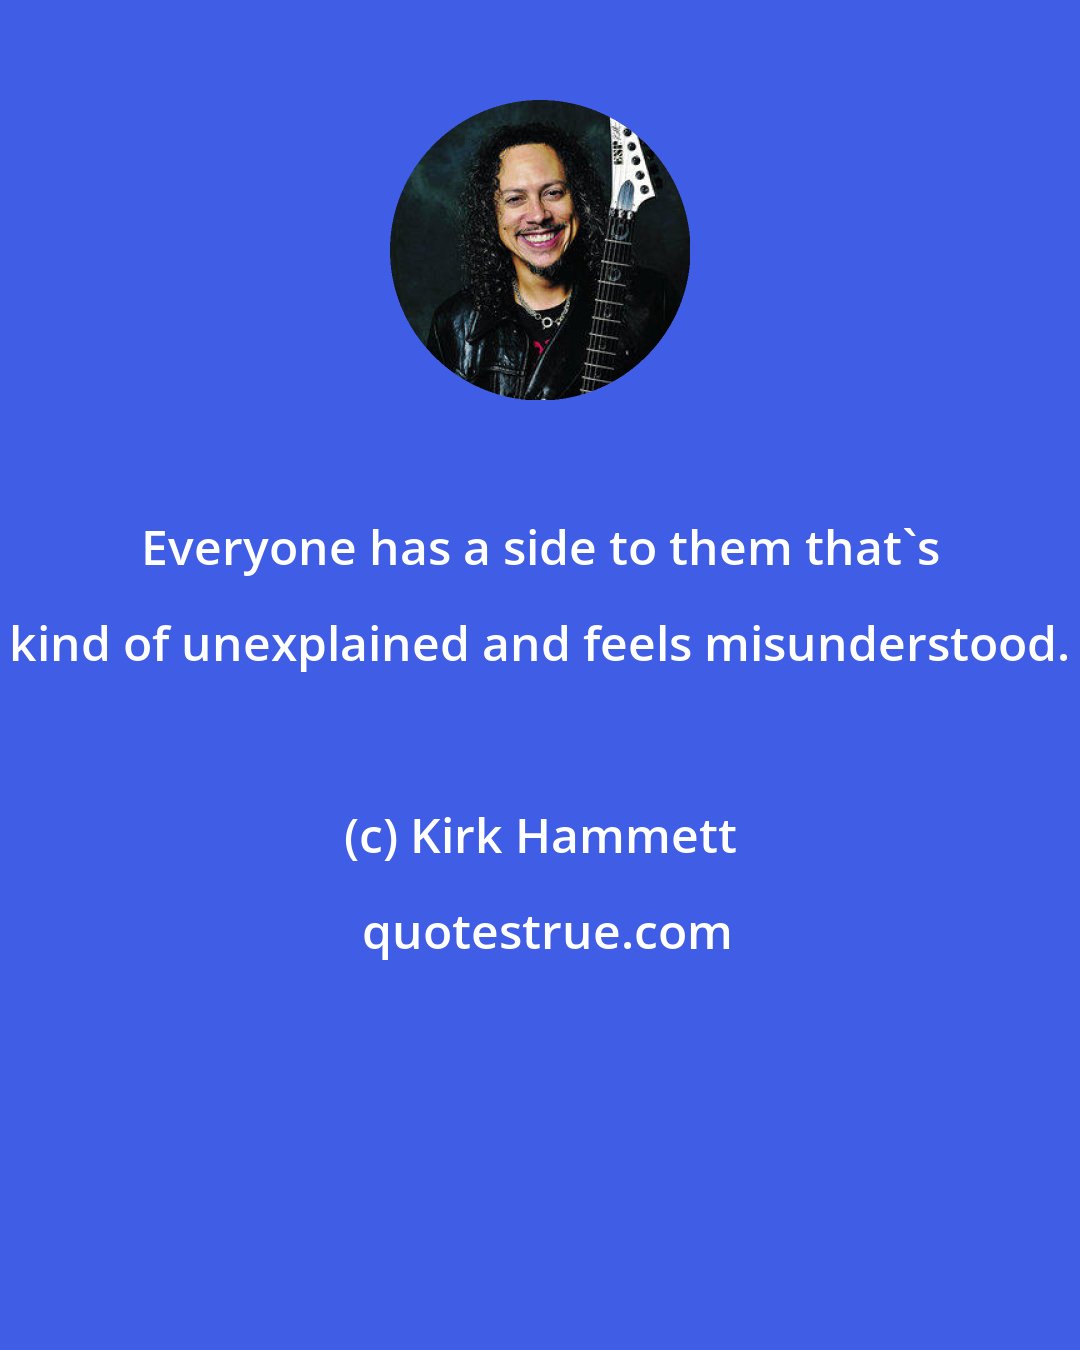 Kirk Hammett: Everyone has a side to them that's kind of unexplained and feels misunderstood.